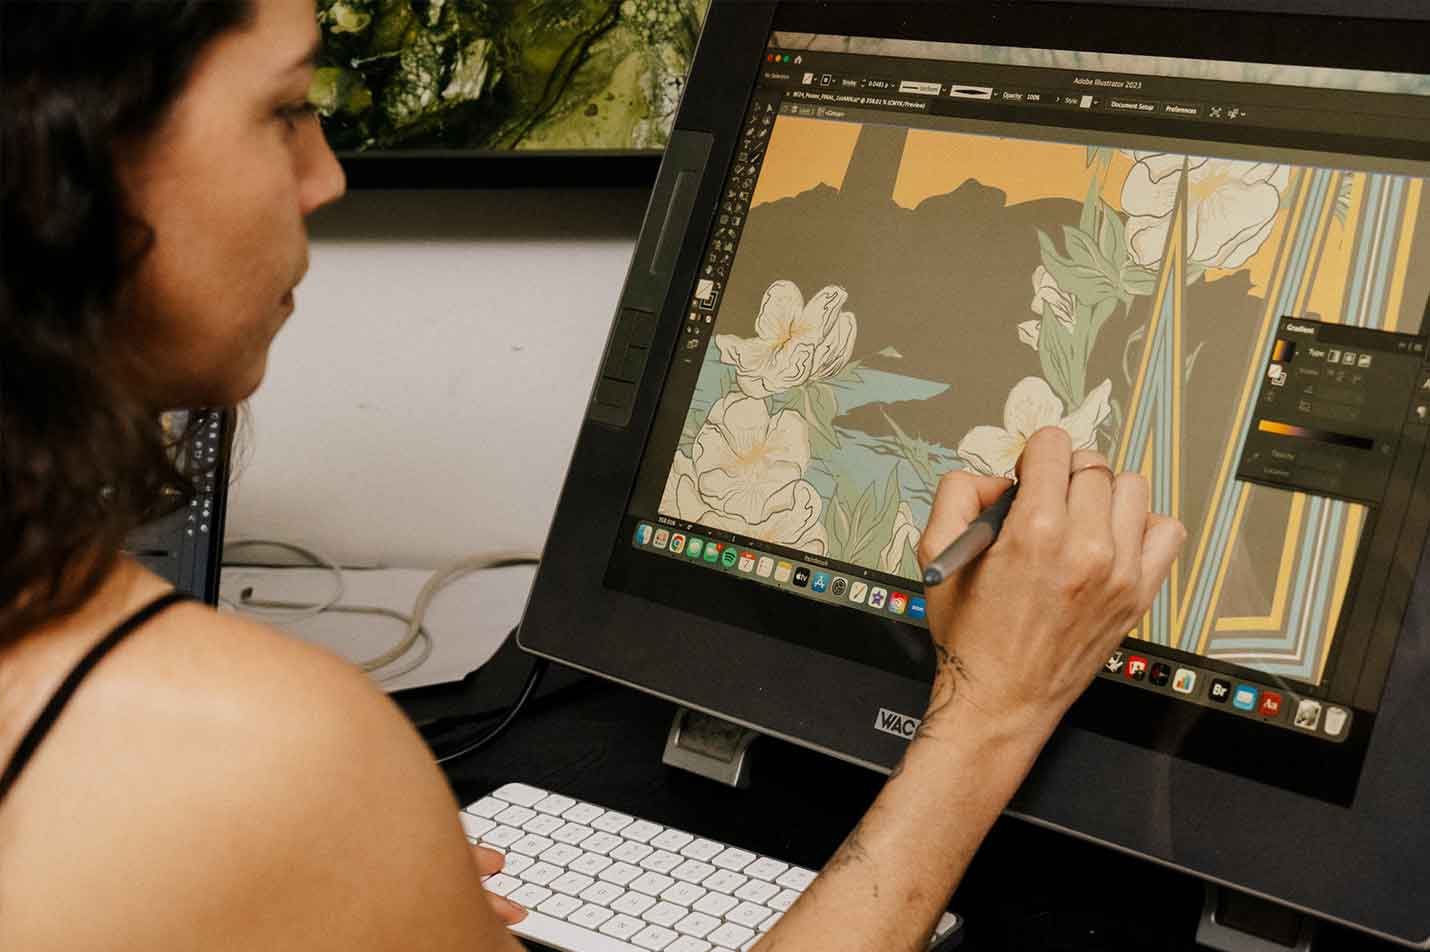 Girl with tattoos draws with a stylus on a wacom tablet screen. Illustrations and software appear on the monitor